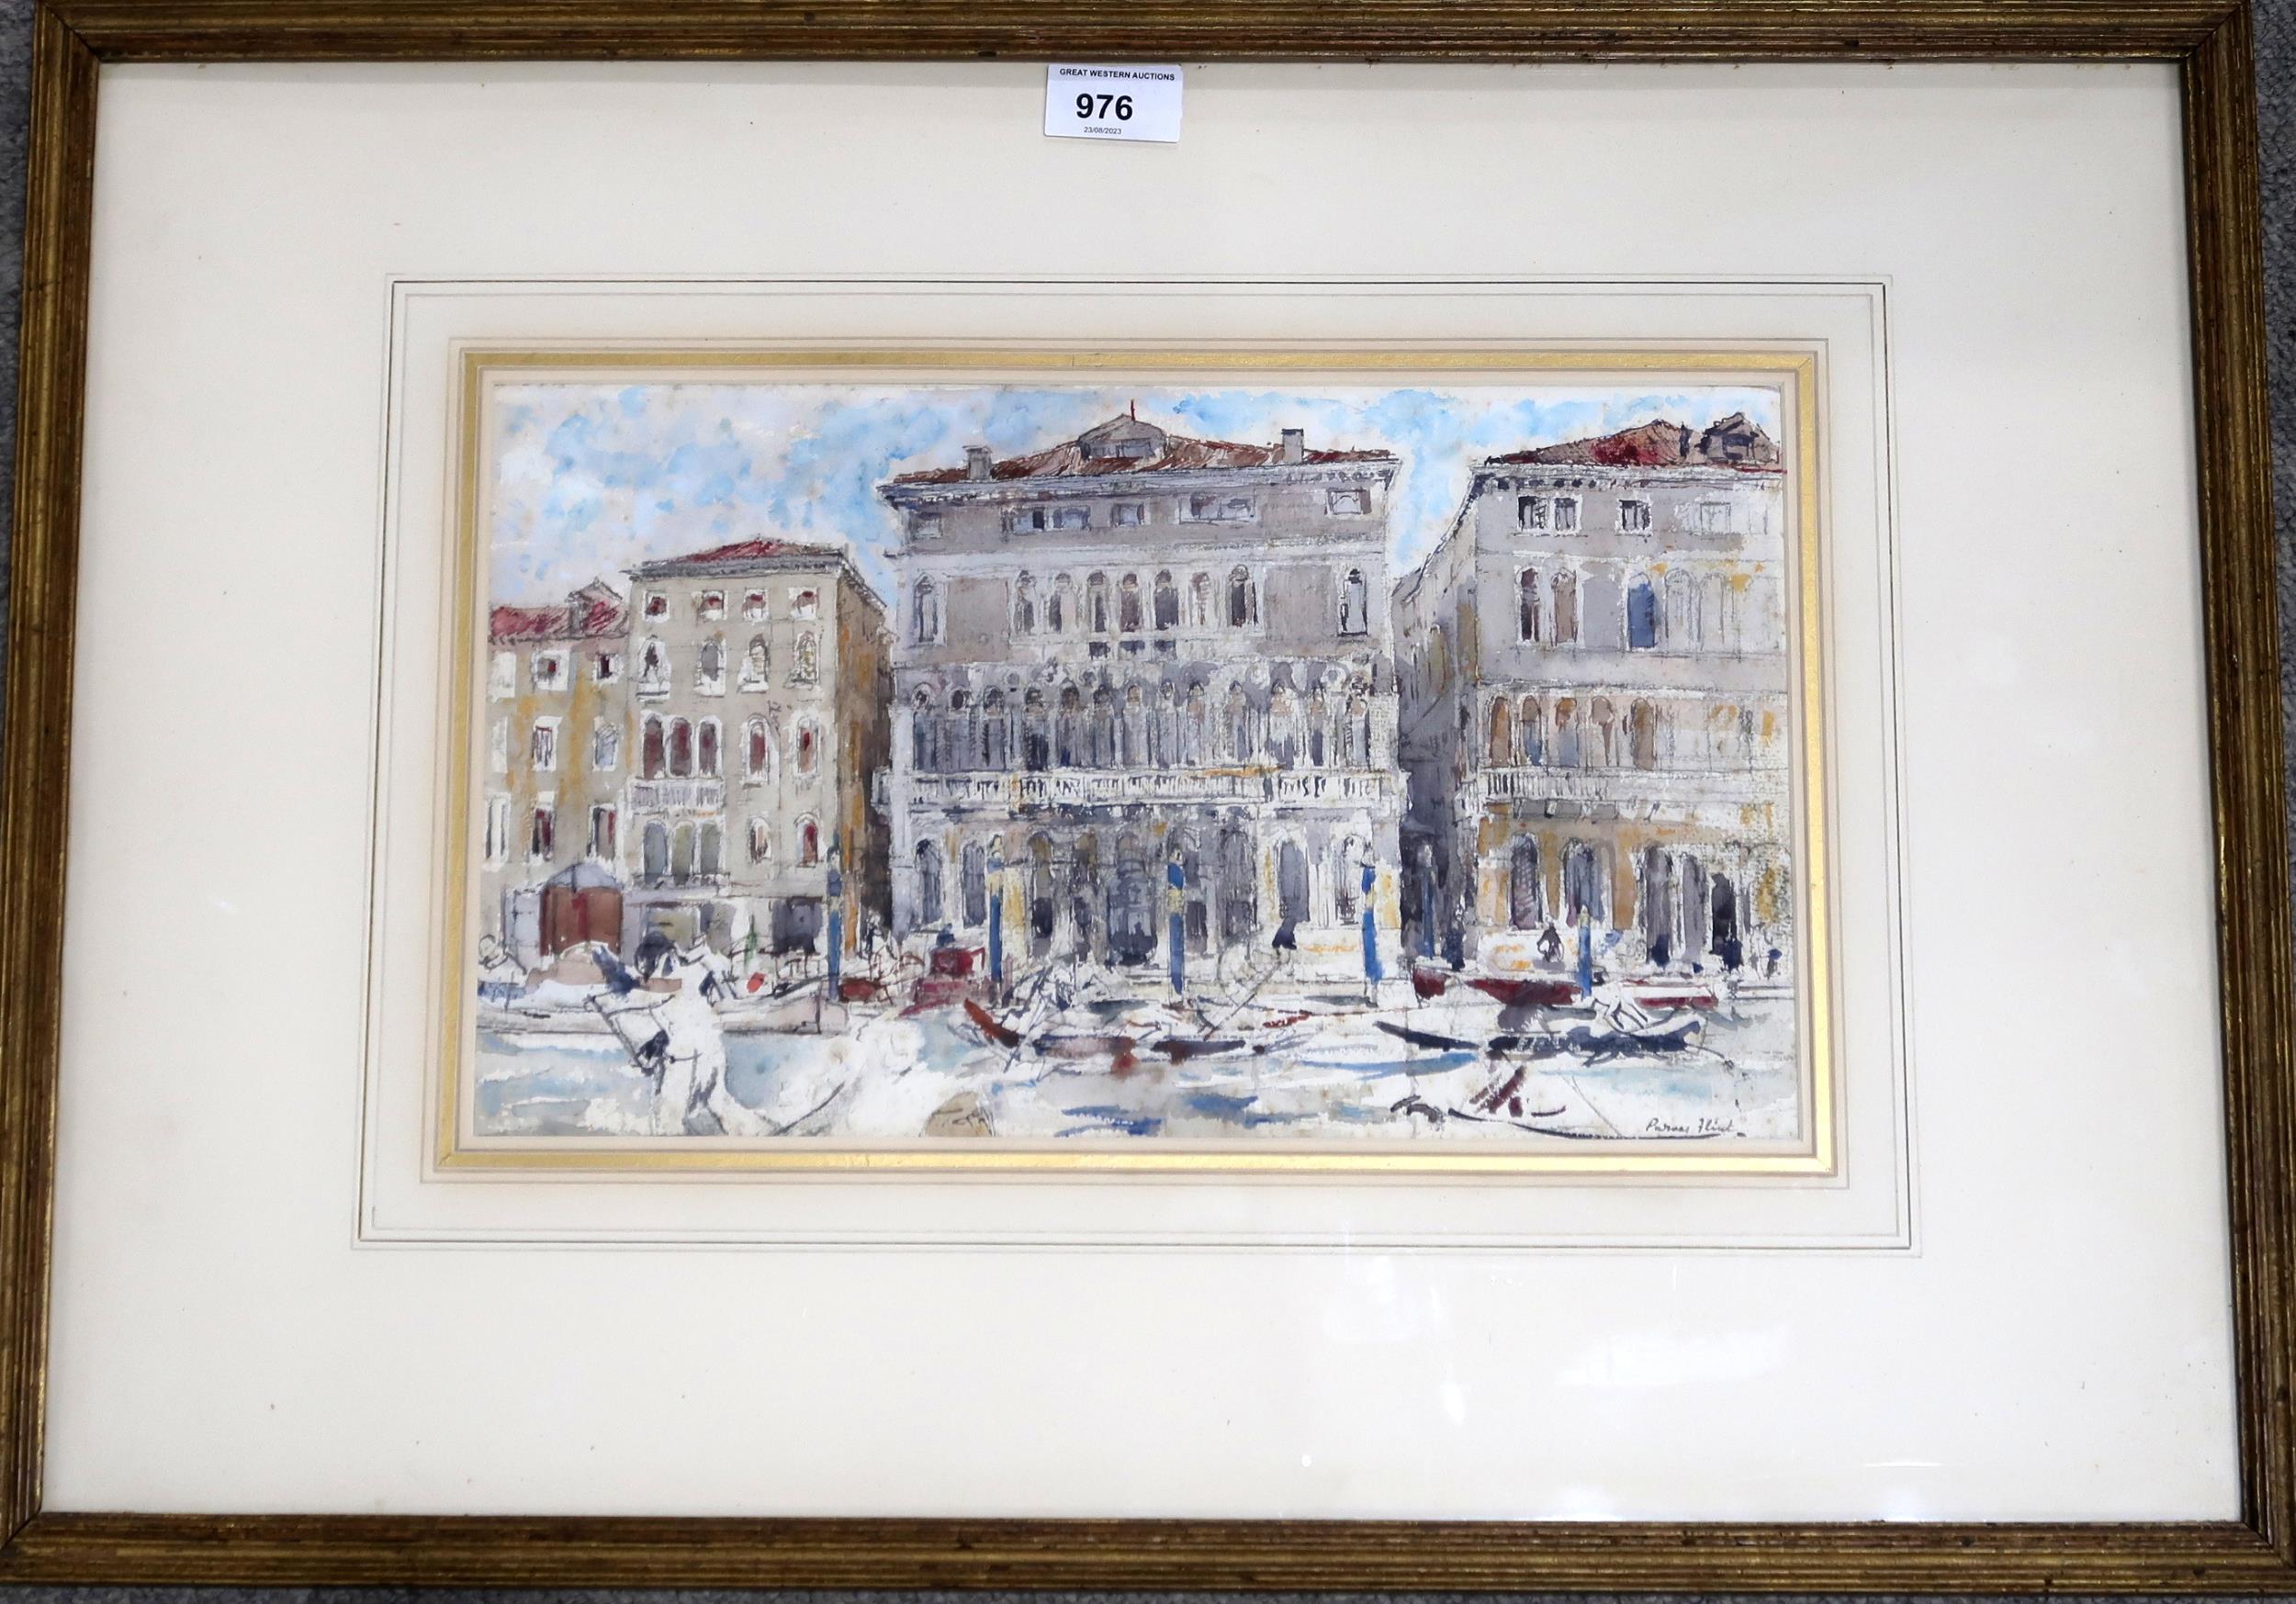 ROBERT PURVES FLINT (SCOTTISH 1883-1947) GRAN CANAL, VENICE Watercolour, signed lower right, 21 x - Image 2 of 3